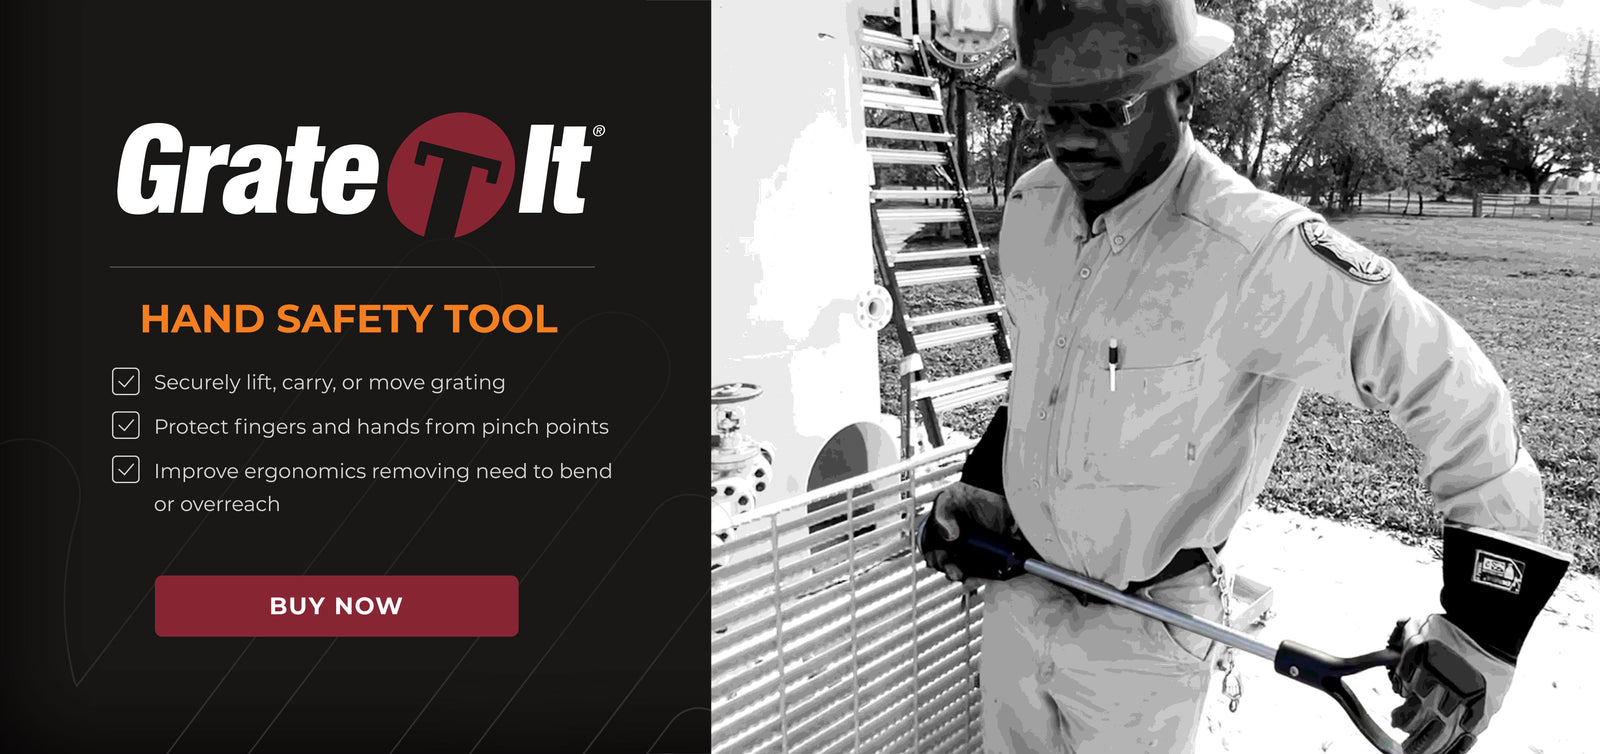 SnareIt® No Touch Hand Safety Tool - The Hand Safety Tool Company